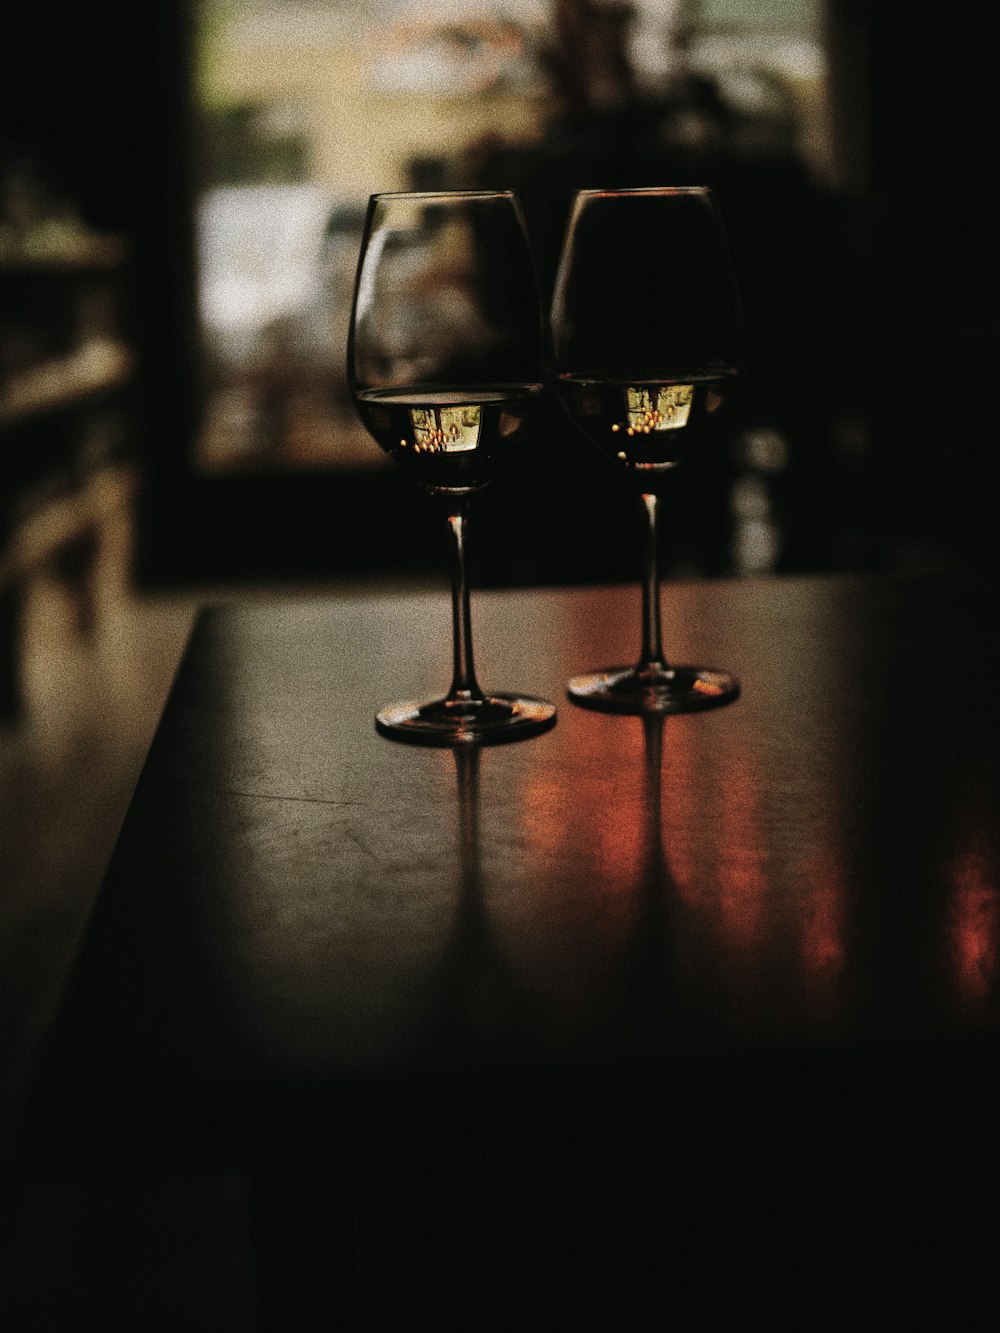 two wine glasses sitting on top of a wooden table